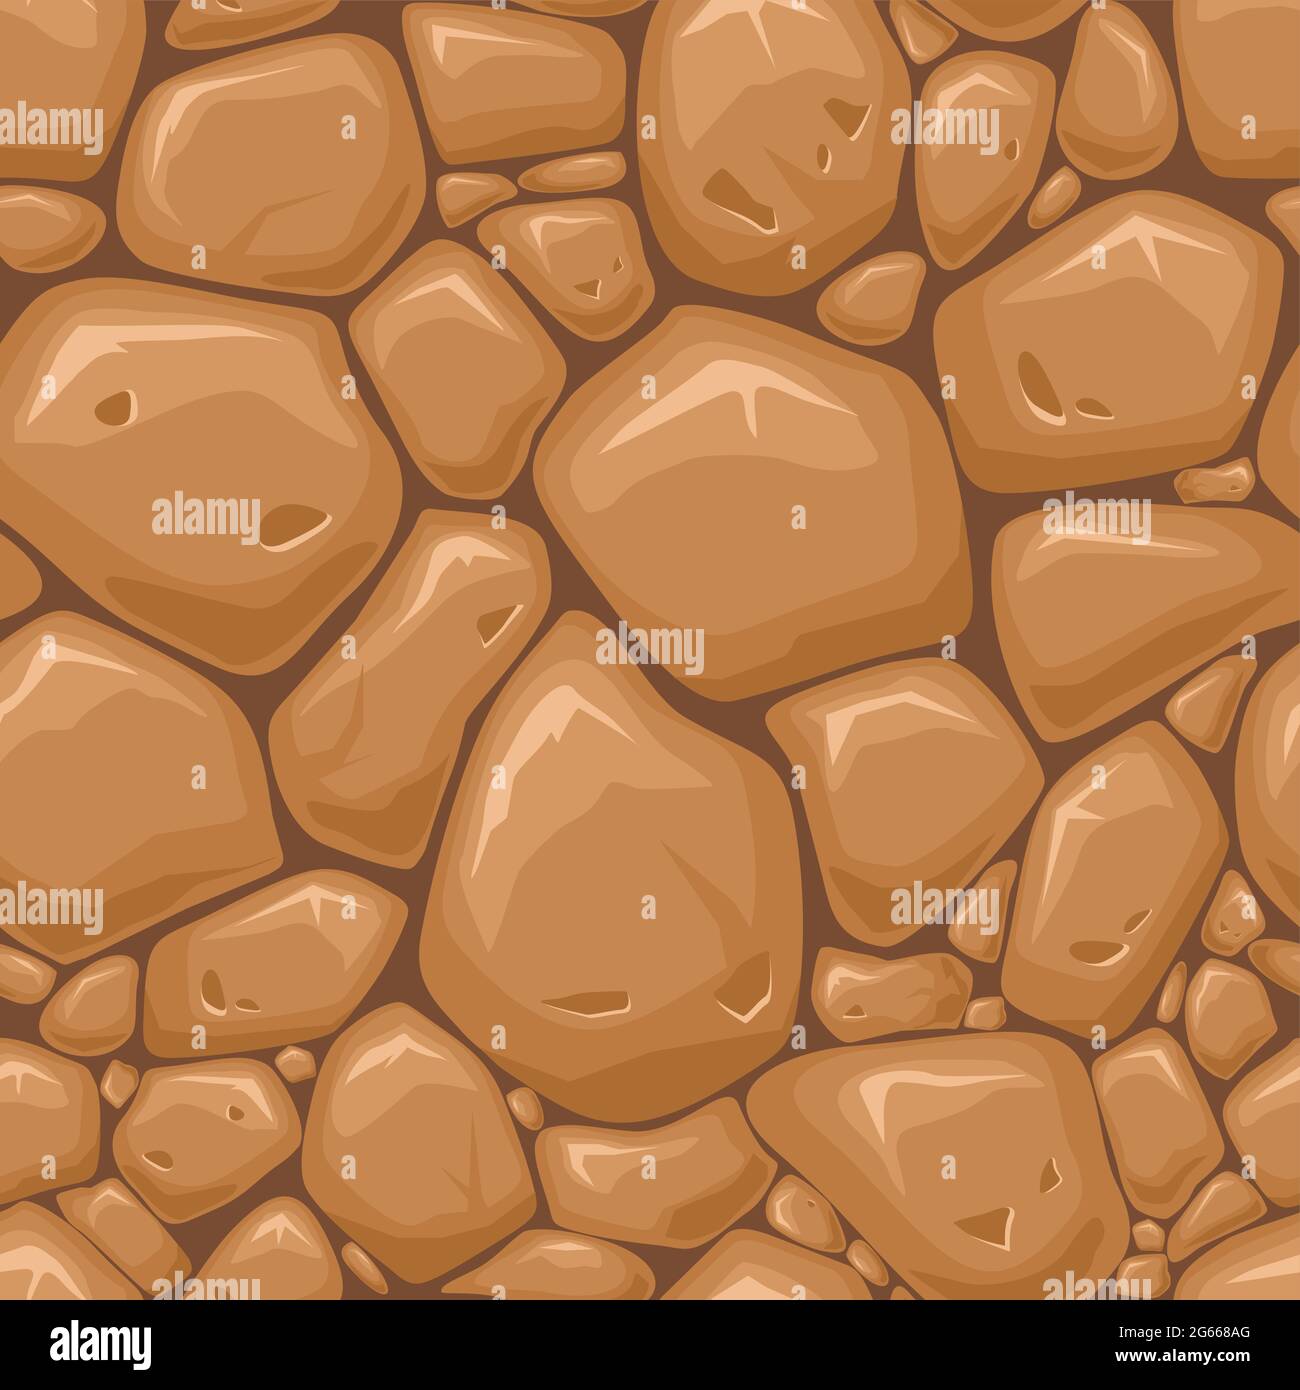 Wall with rocks or stones texture seamless pattern cartoon vector illustration background Stock Vector